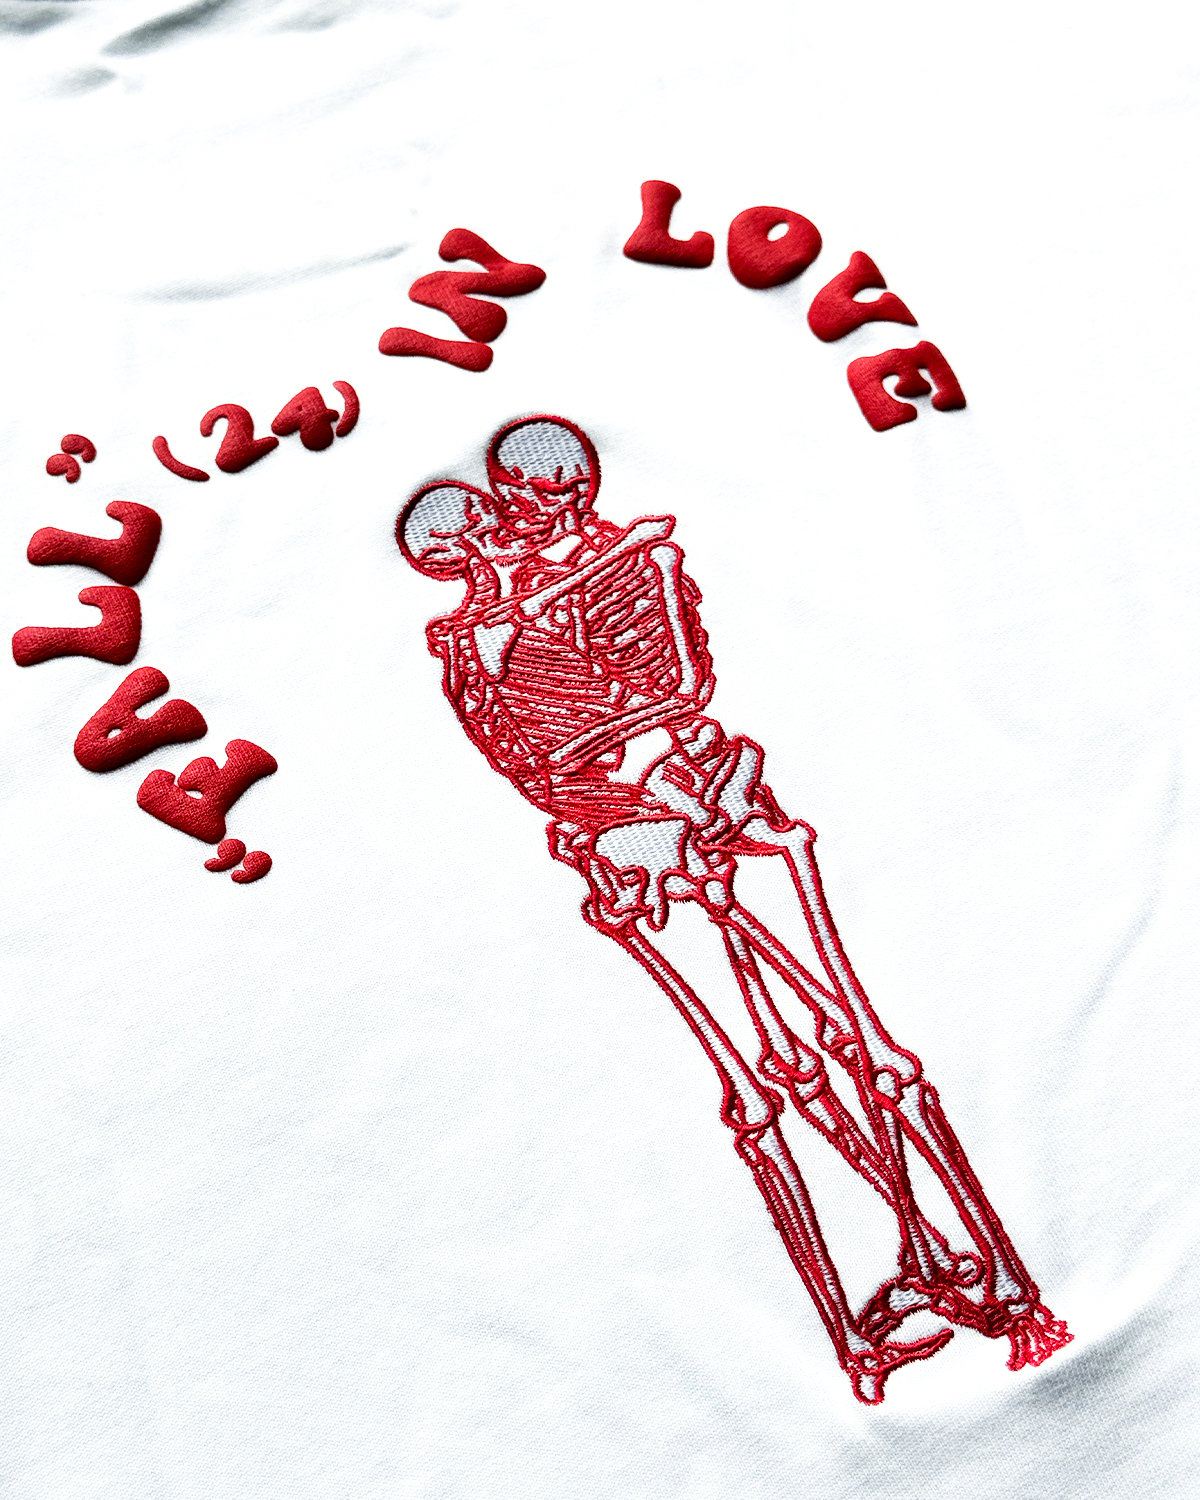 Image of "Fall" (24) in love Boxyfit Tee